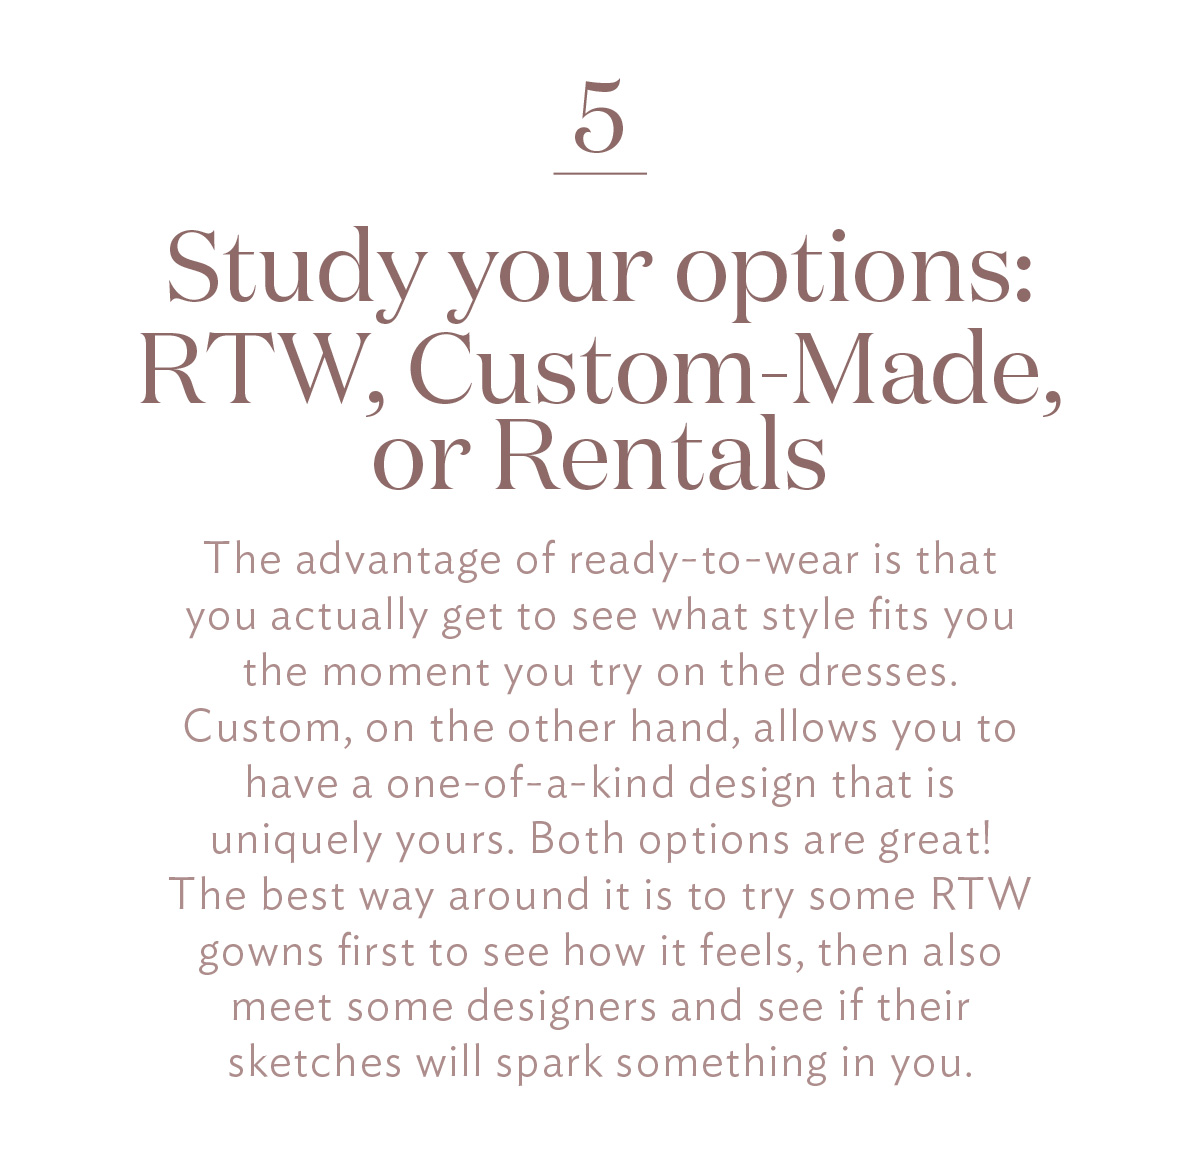 Study your options: RTW, Custom-Made, or Rentals The advantage of ready-to-wear is that you actually get to see what style fits you the moment you try on the dresses. Custom, on the other hand, allows you to have a one-of-a-kind design that is uniquely yours. Both options are great! The best way around it is to try some RTW gowns first to see how it feels, then also meet some designers and see if their sketches will spark something in you.